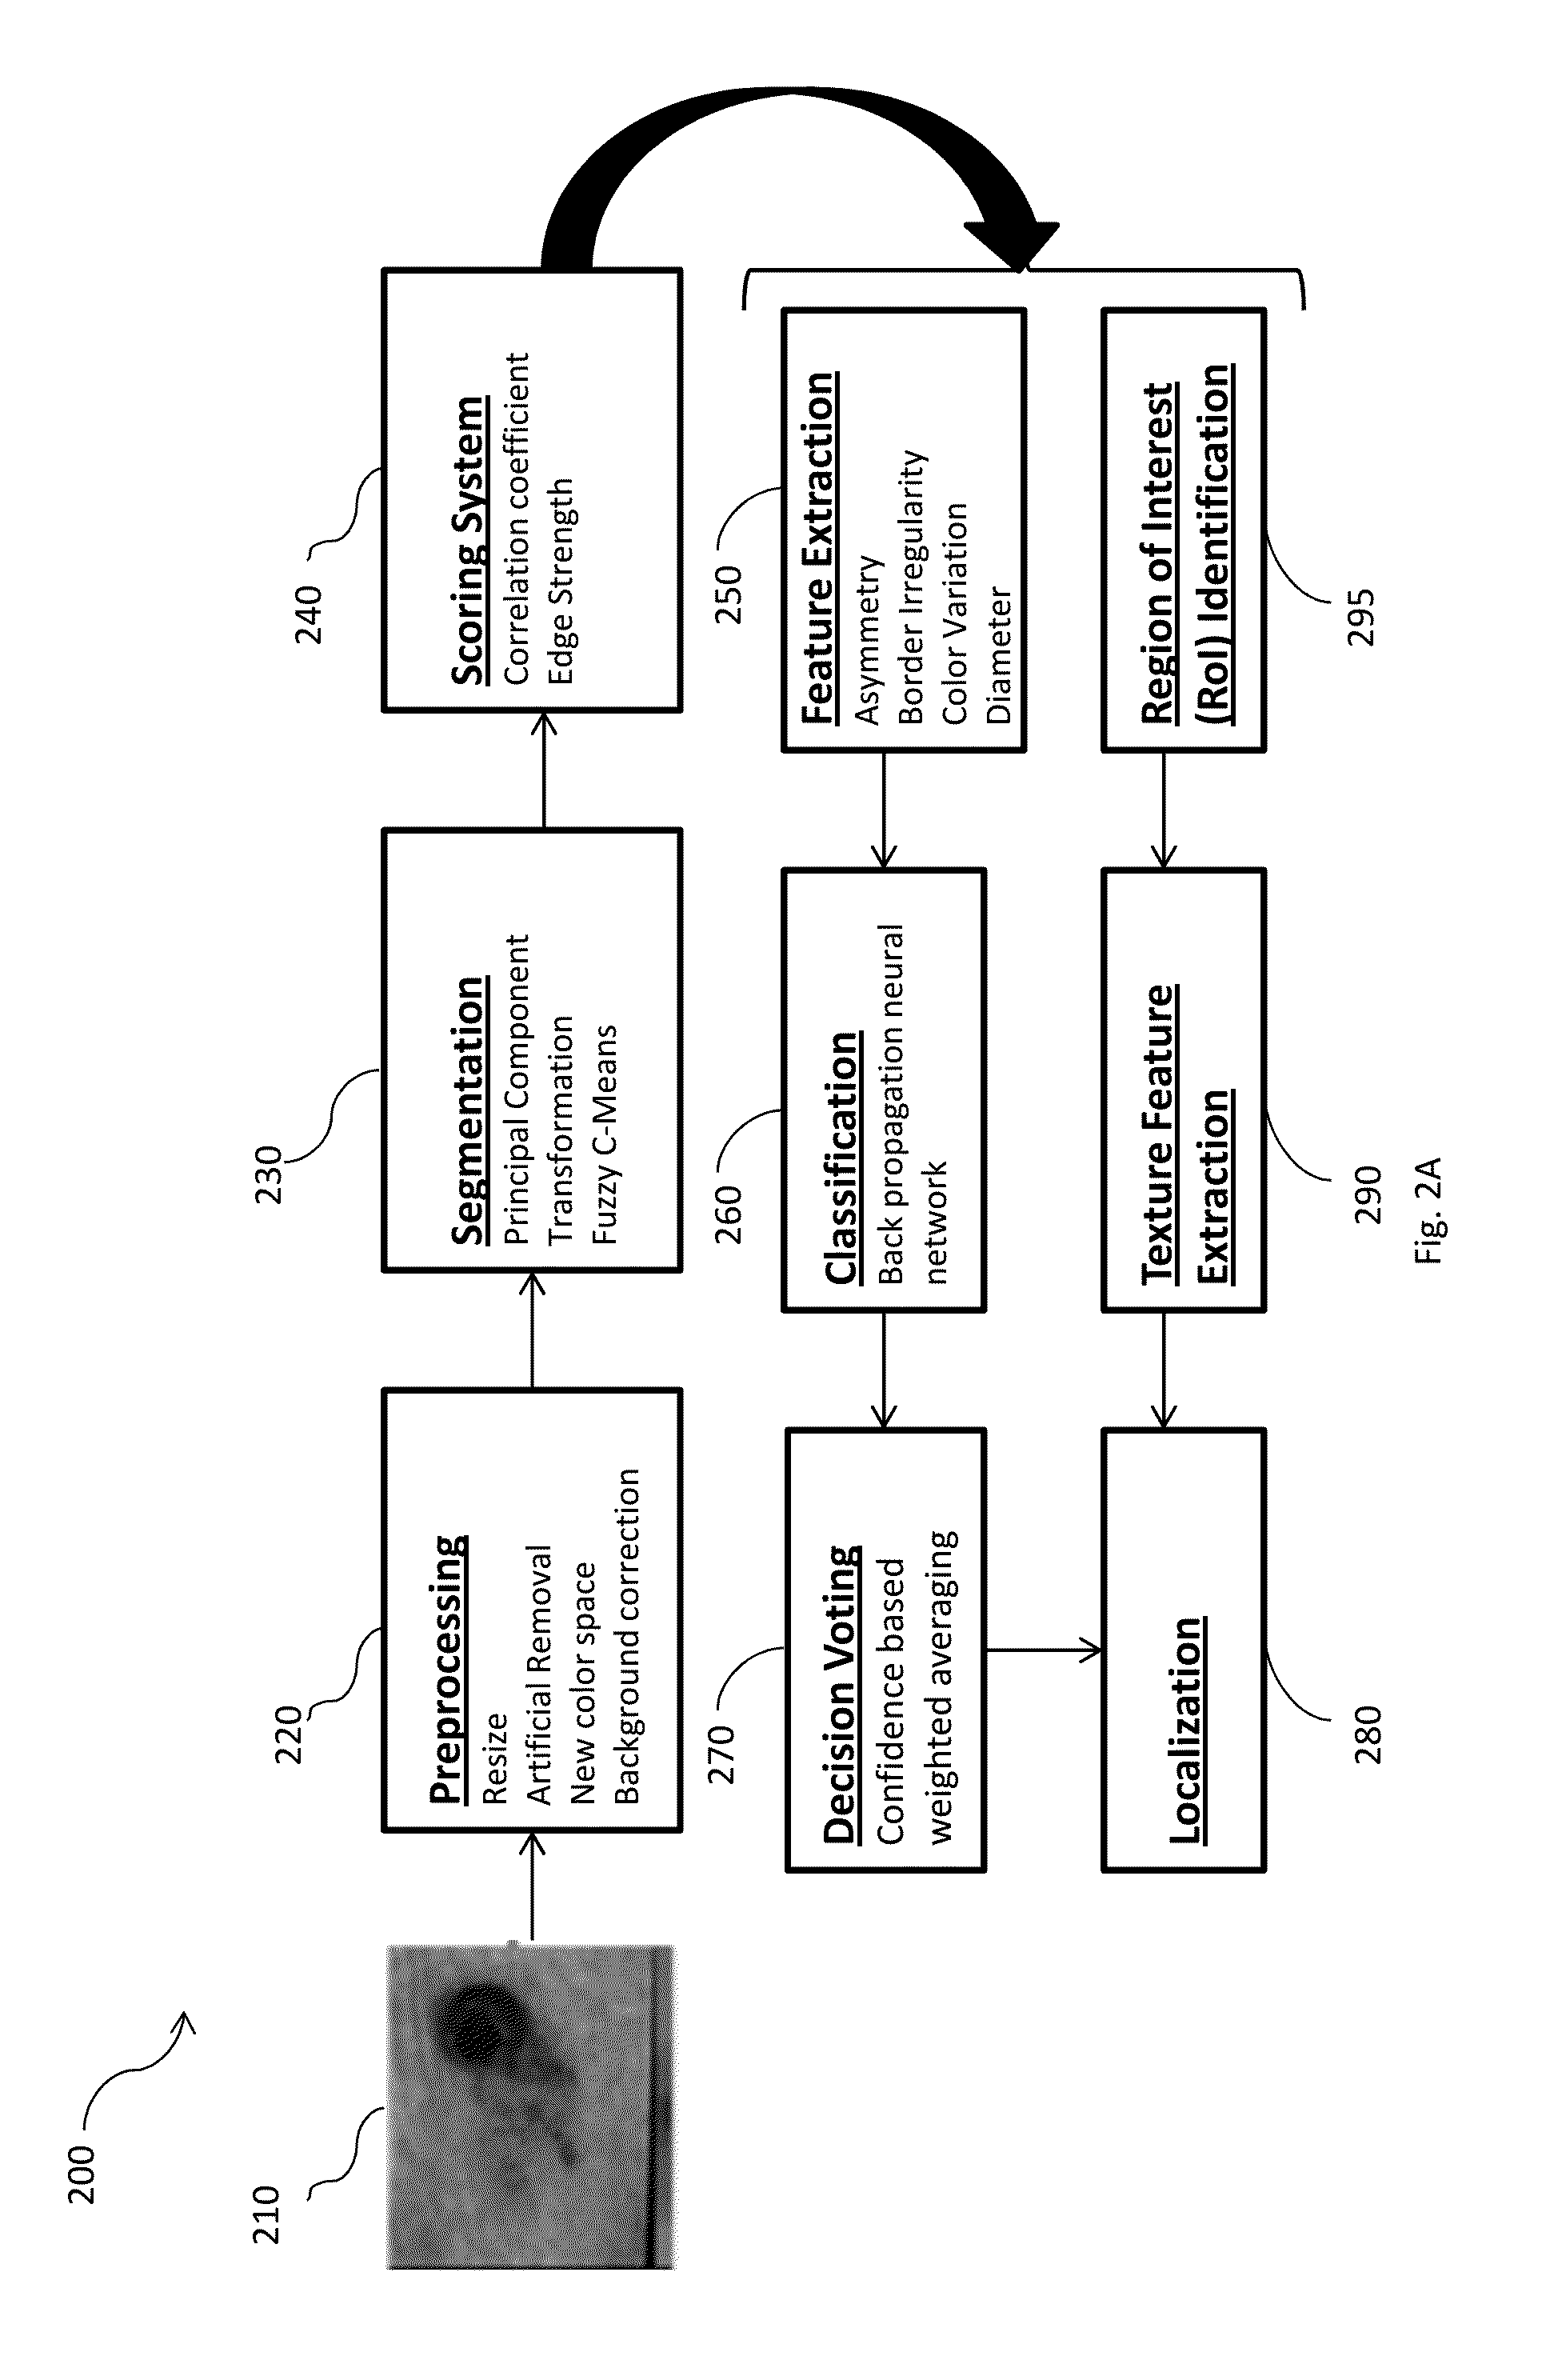 System and method for classifying a skin infection